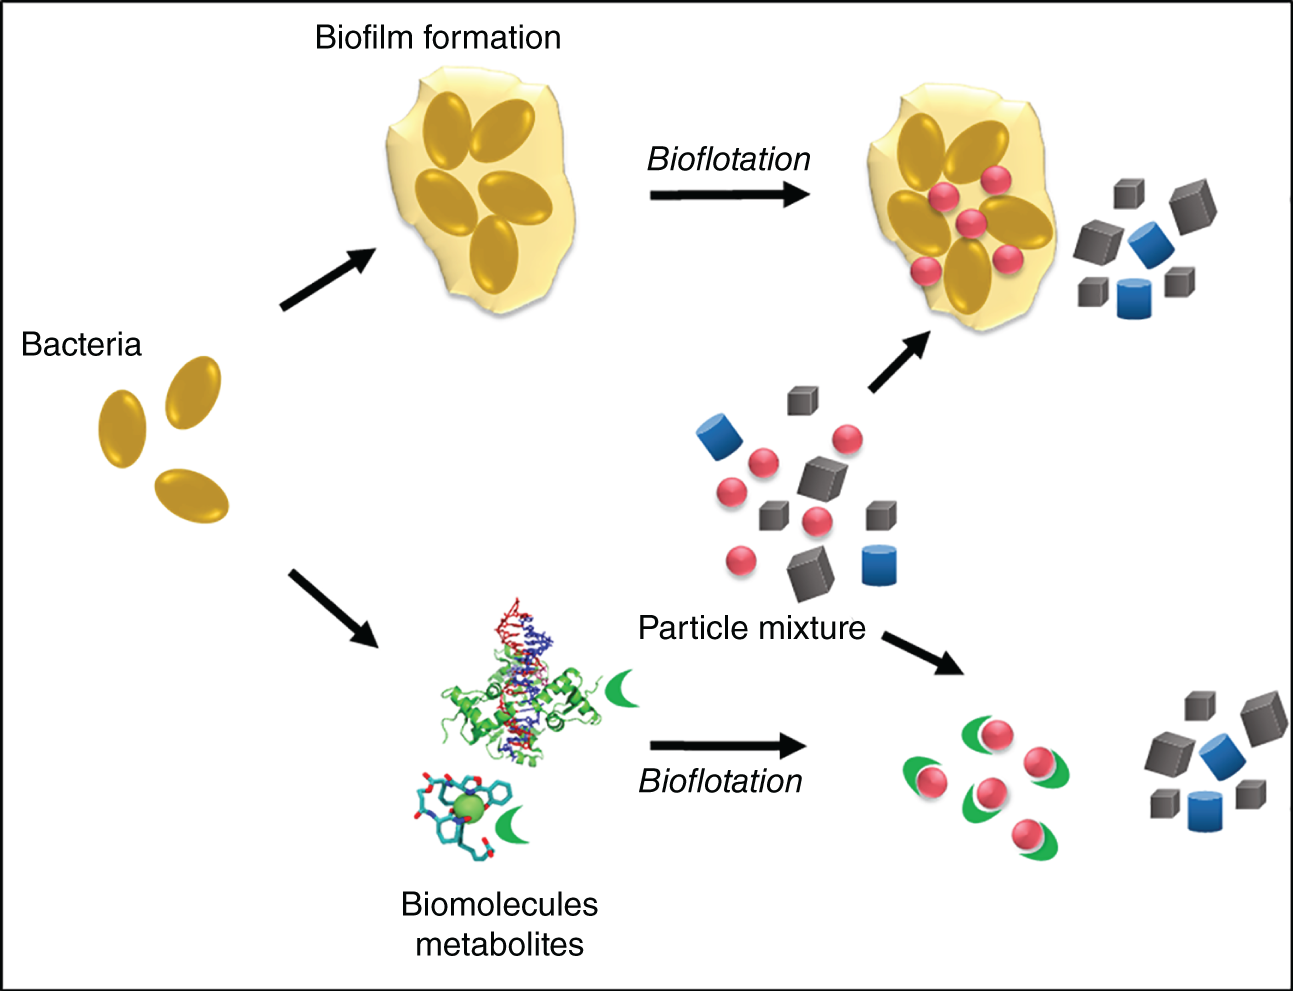 Schematic illustration of use of extracellular polymeric substances (EPS) producing bacteria and biomolecules for particle separation.